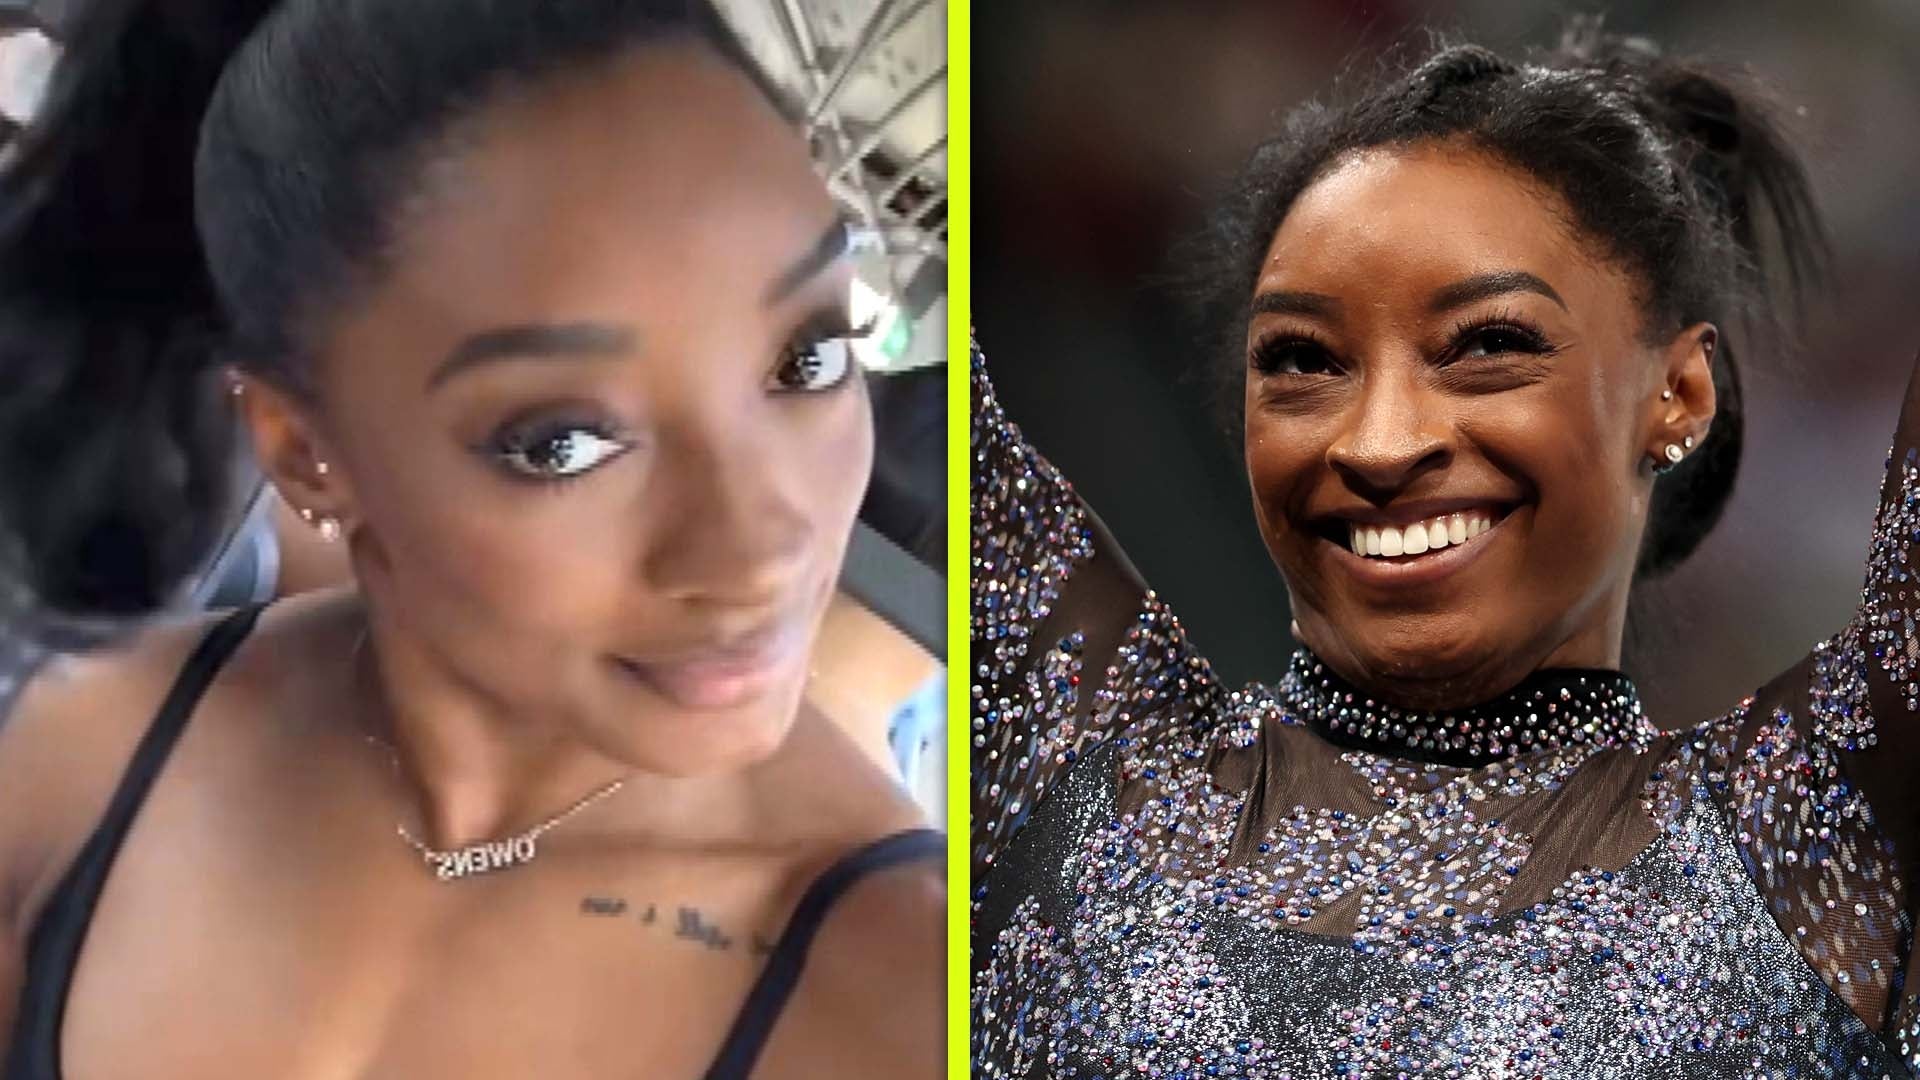 Simone Biles Claps Back at Haters Who Criticized Her Hair During Olympics Performance